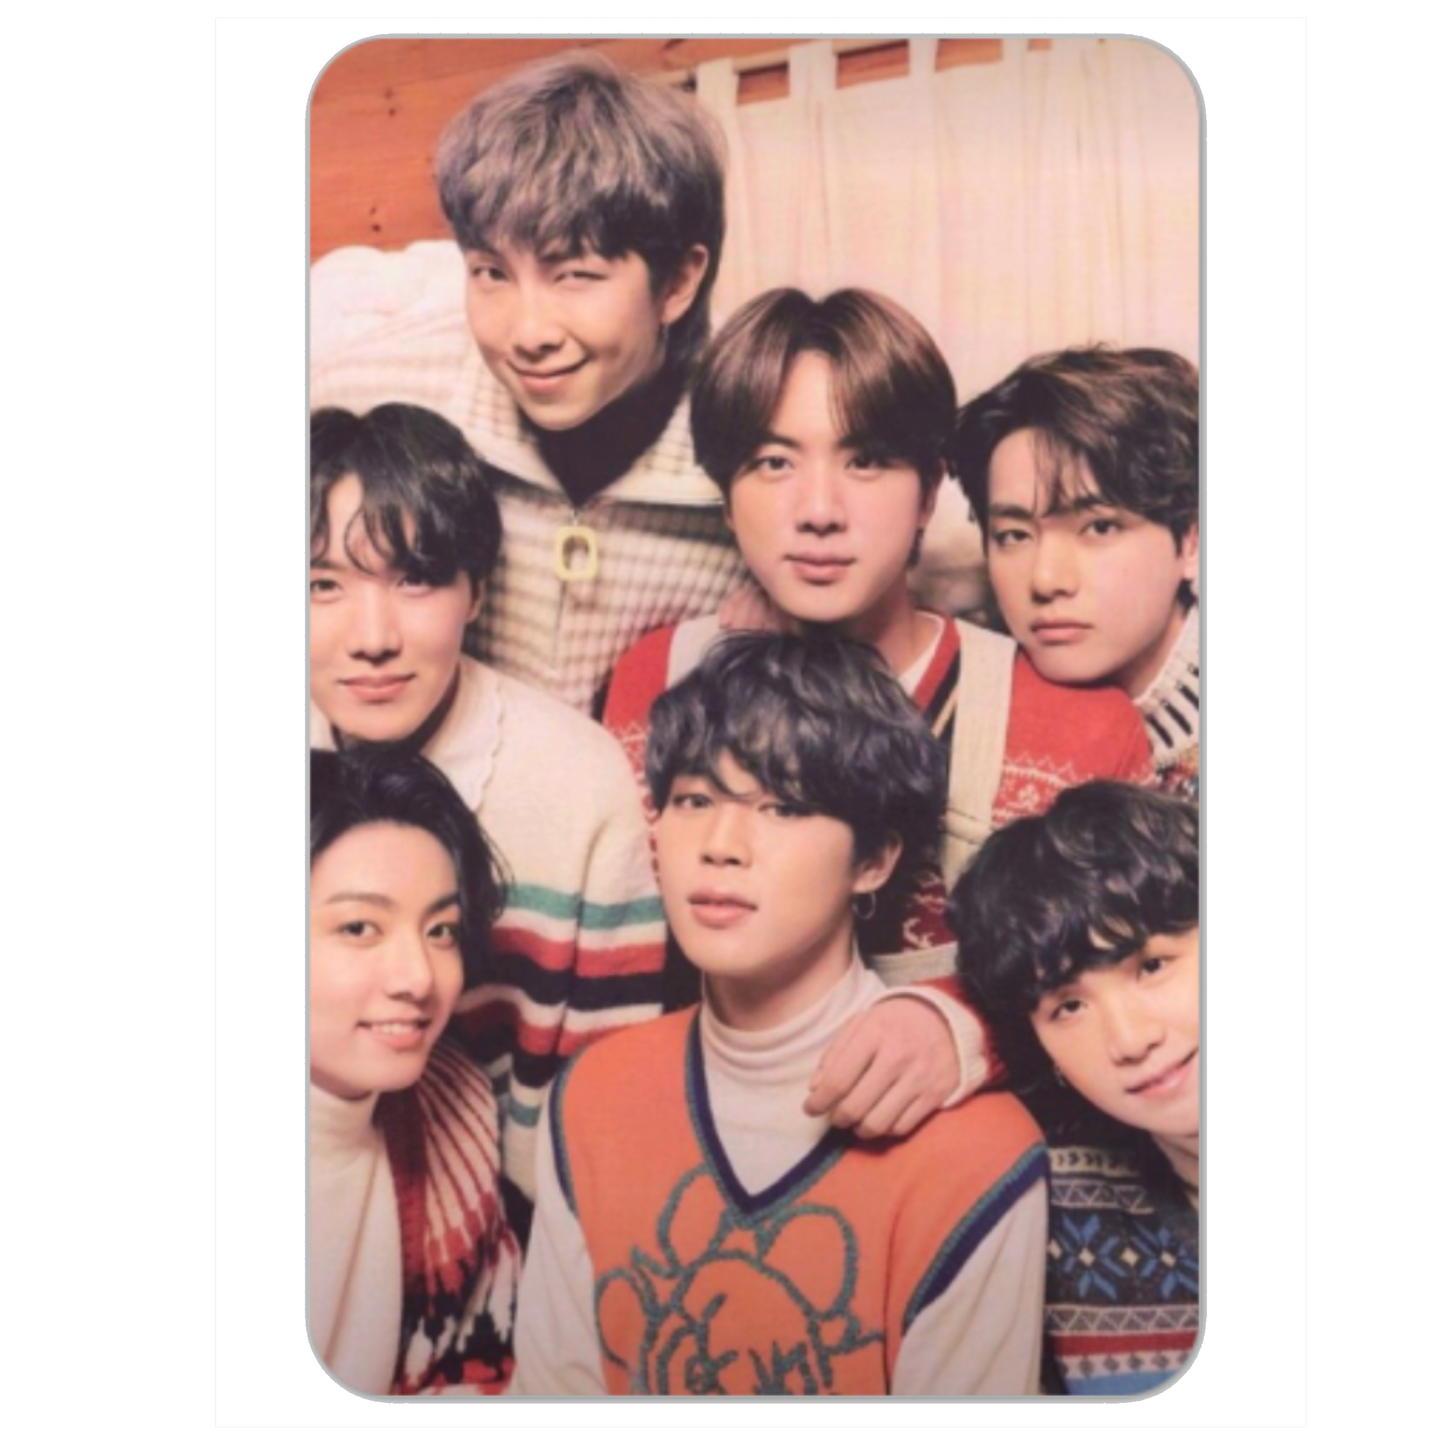 BTS Unofficial Photocard (with sleeve / no toploader) HQ Standard Size